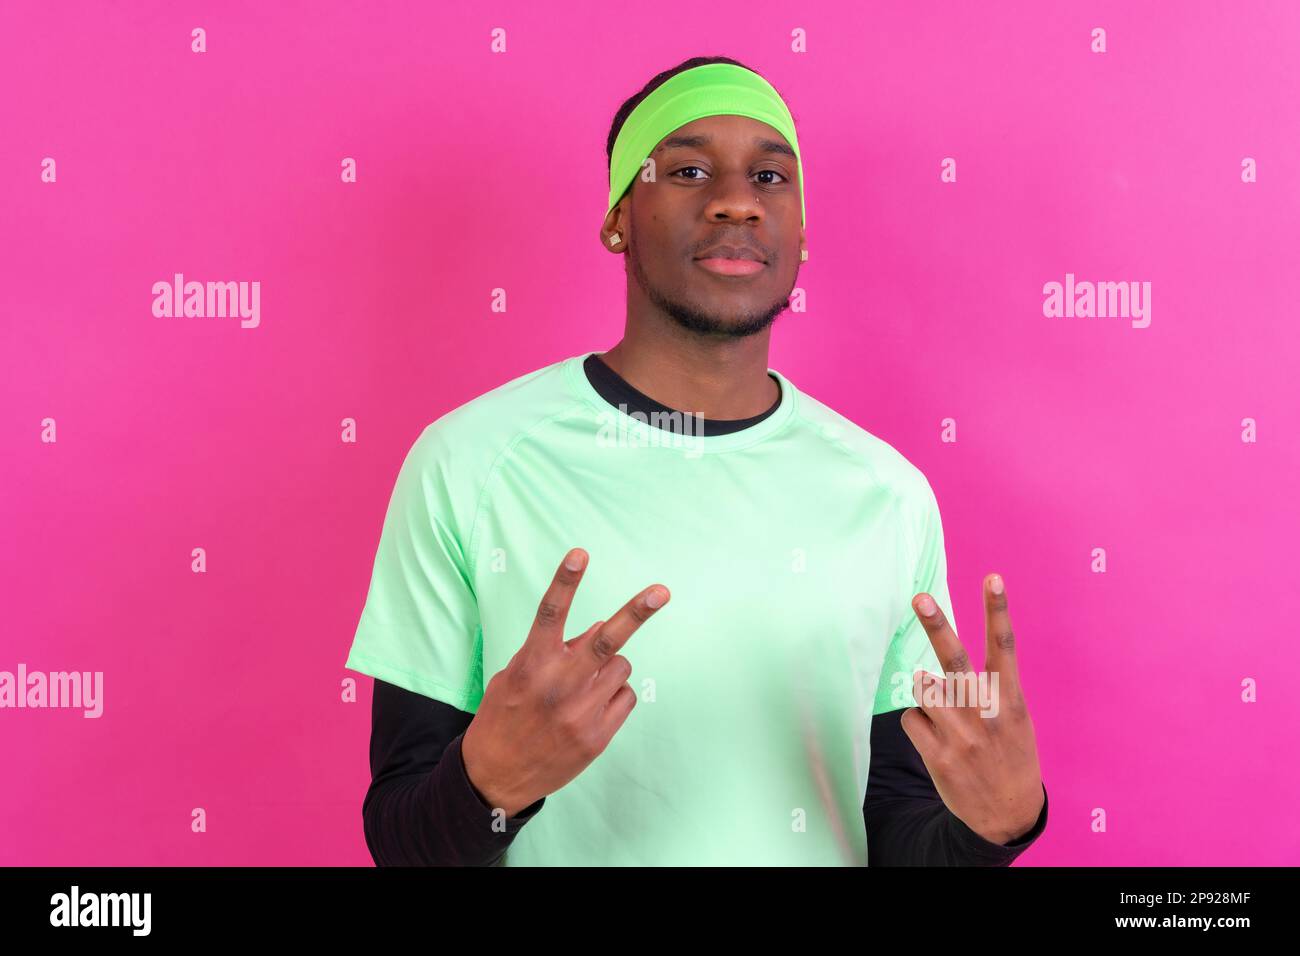 Black ethnic man in green clothes on a pink background, making the win gesture Stock Photo